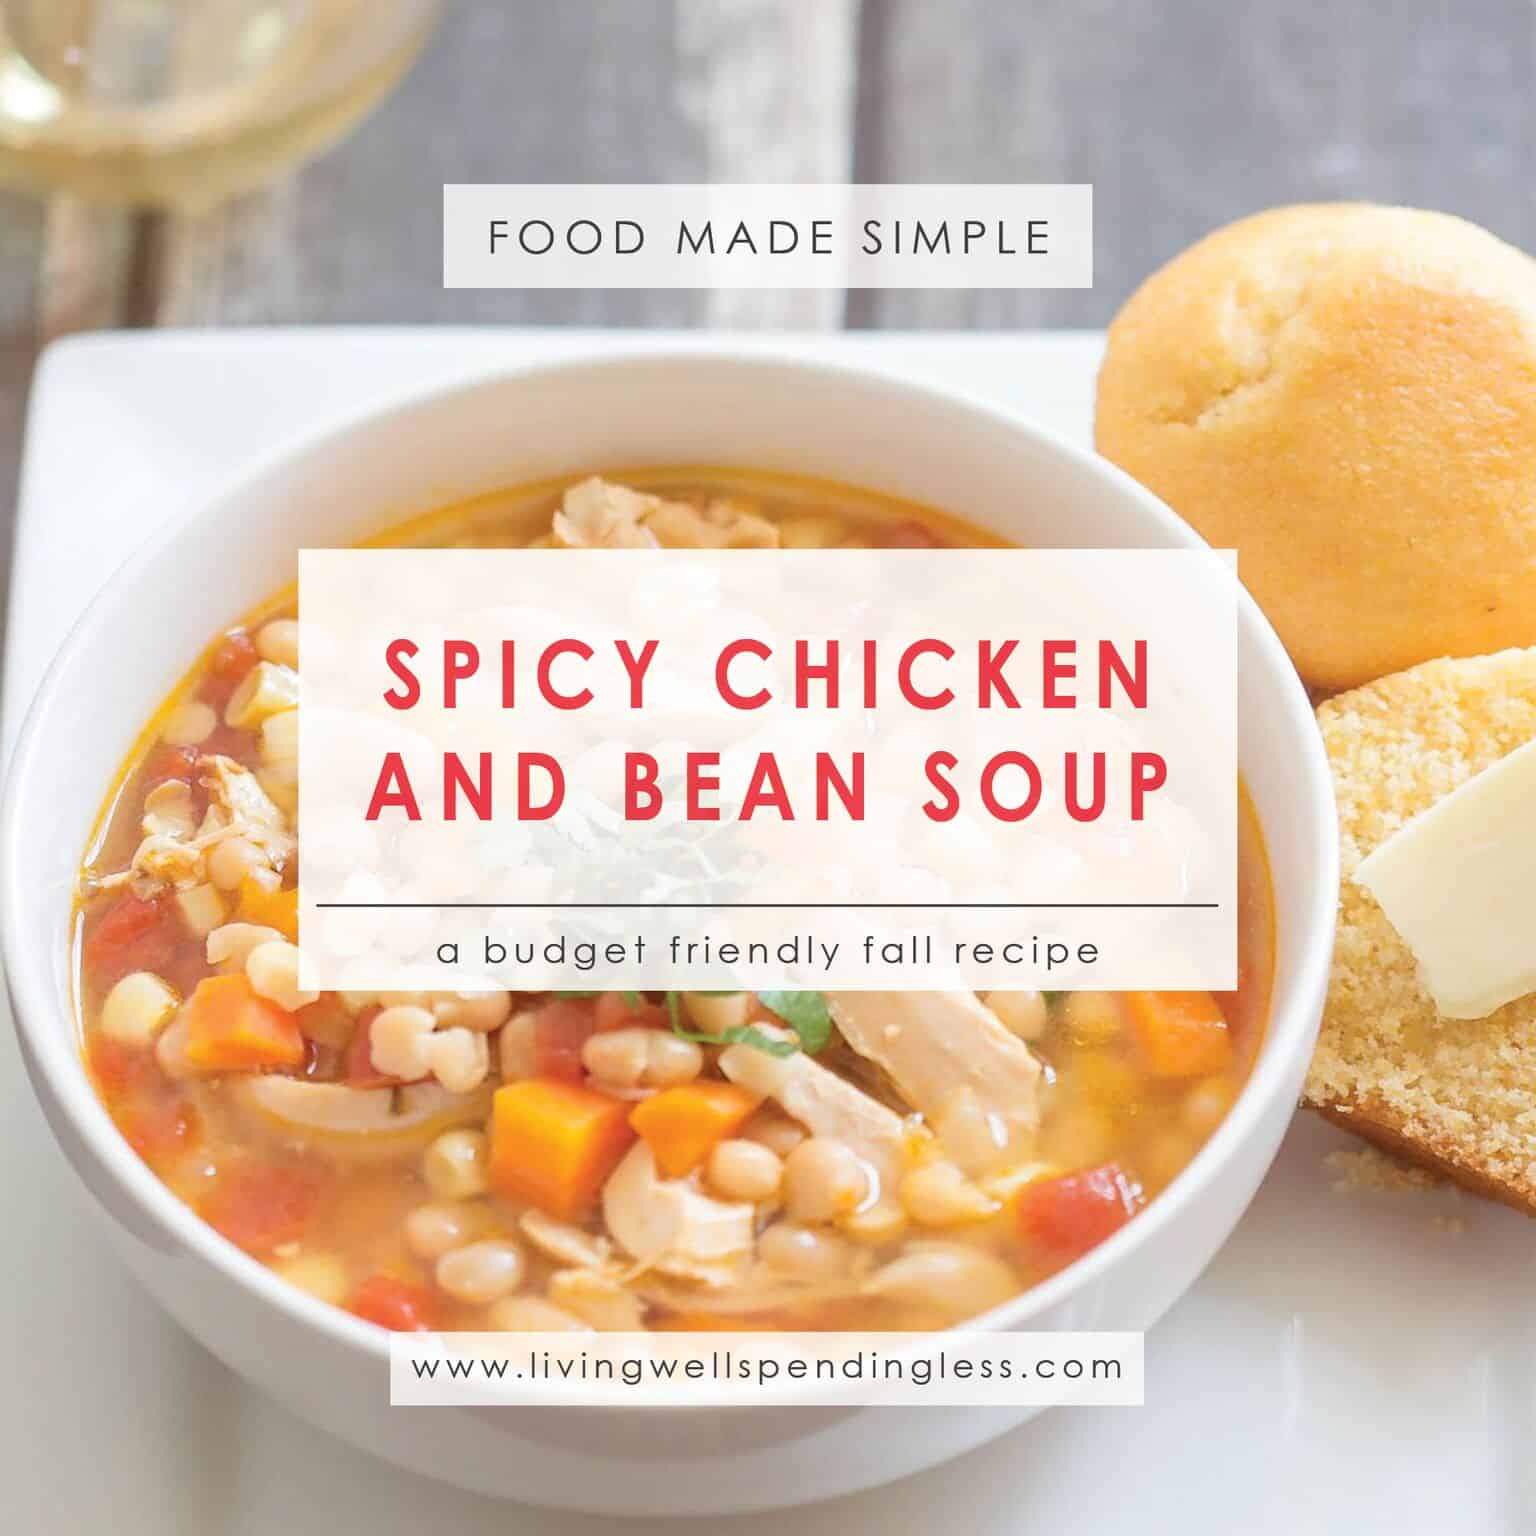 Spicy chicken and bean soup